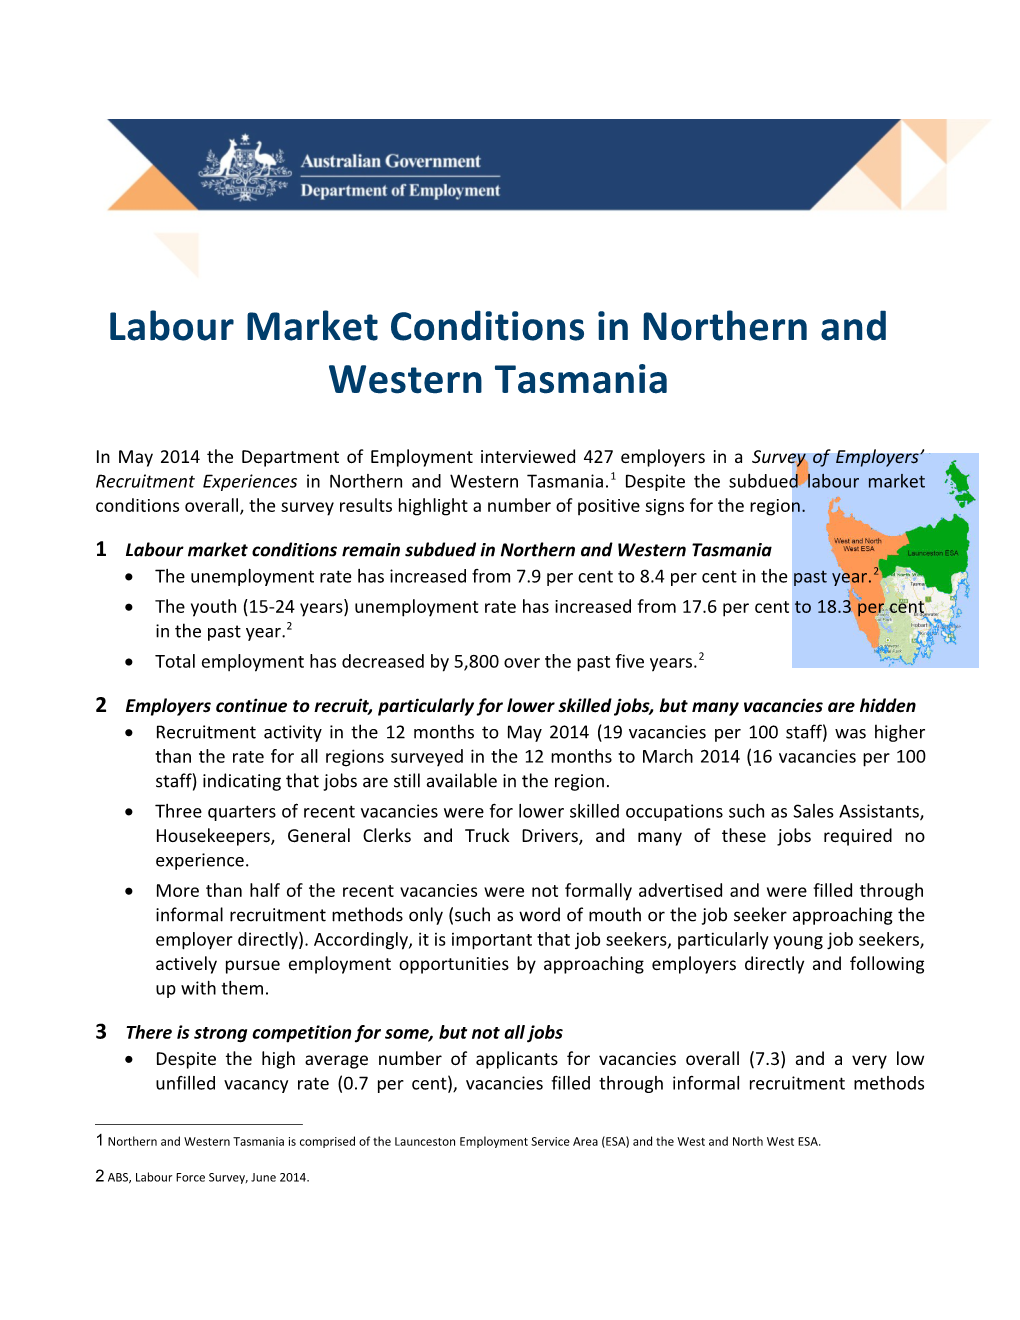 Labour Market Conditions Remain Subdued in Northern and Western Tasmania